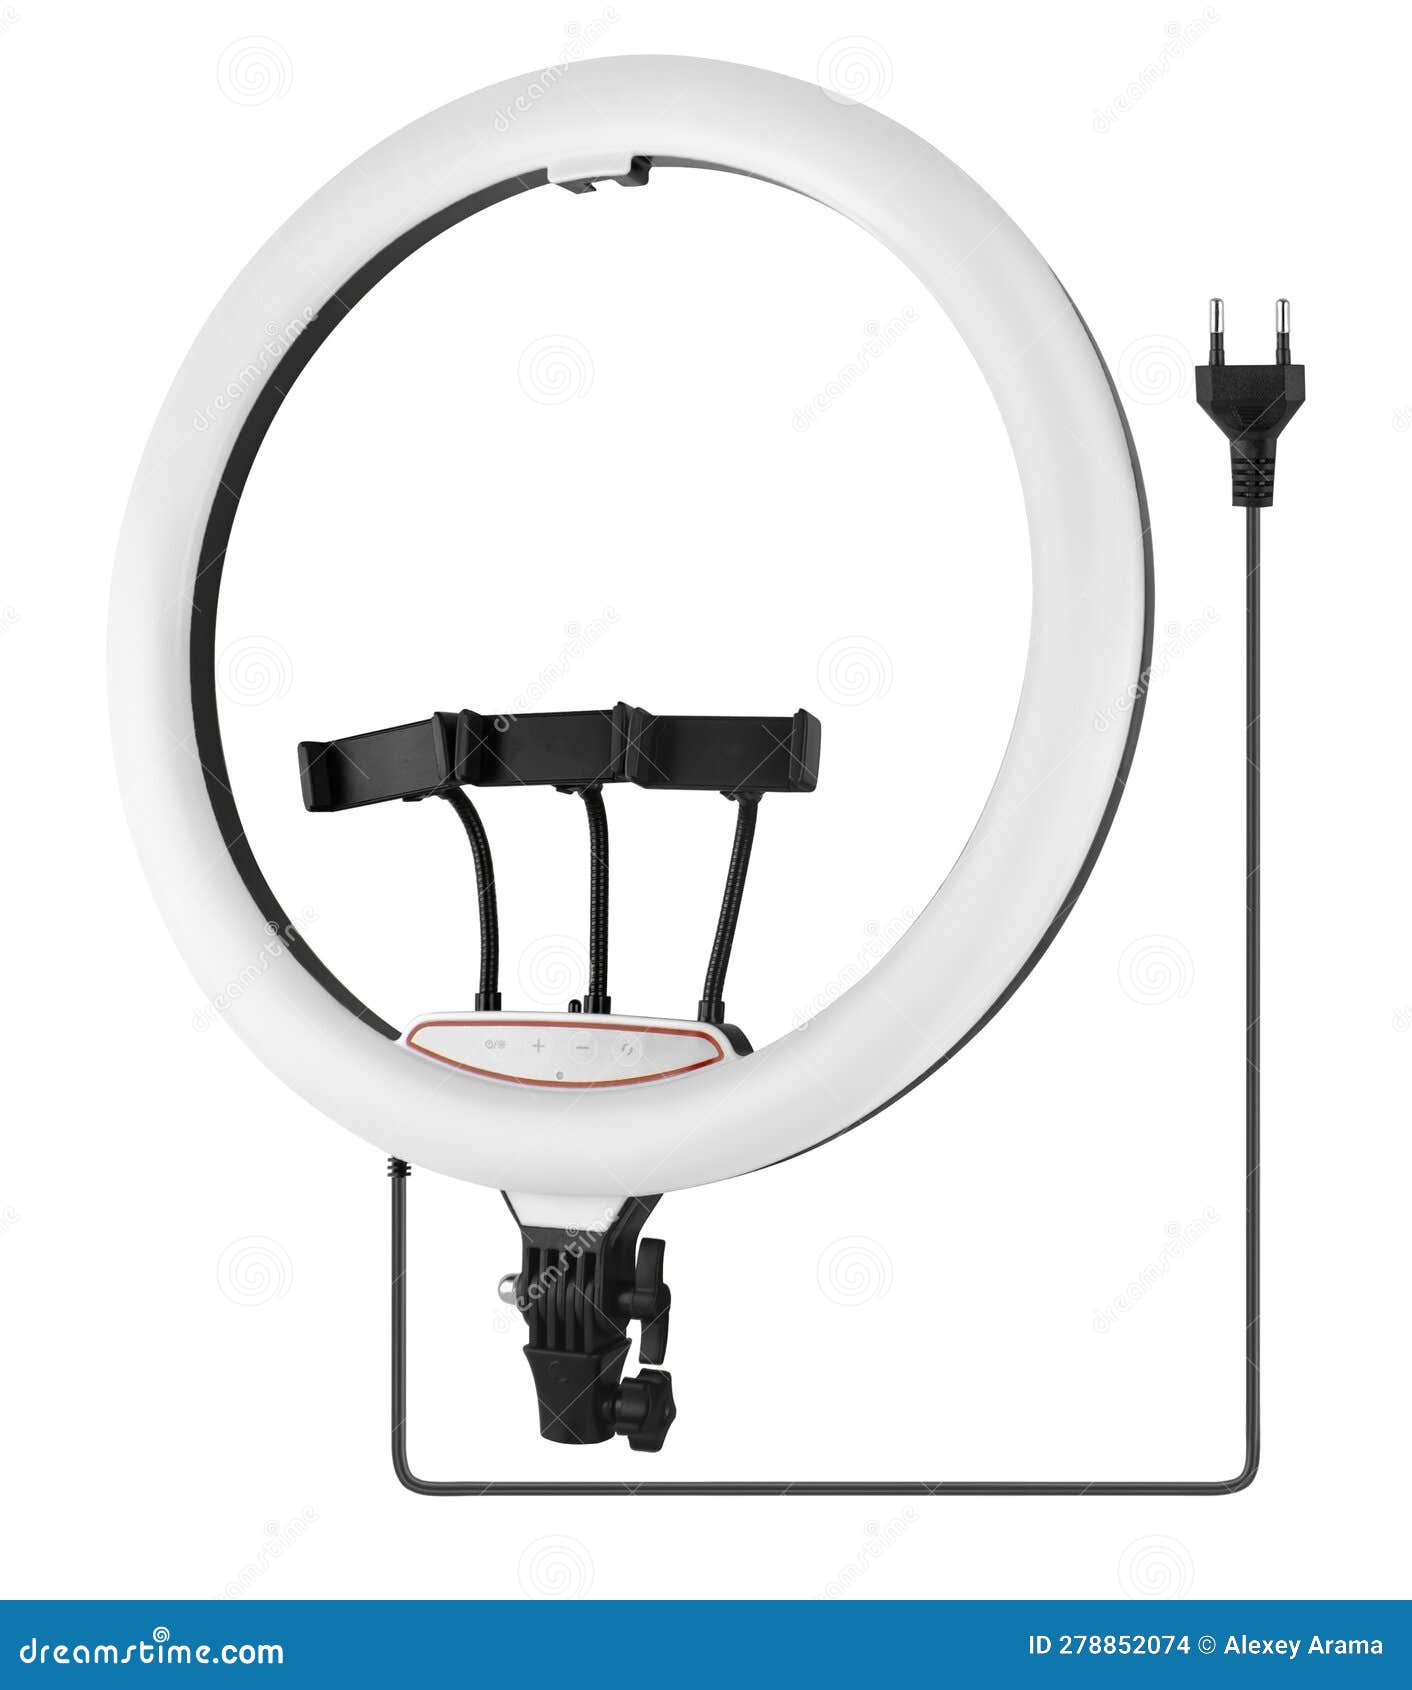 Better Photography, Creative Content? SANDMARC Wireless LED Ring Light  Review - Tangible Day